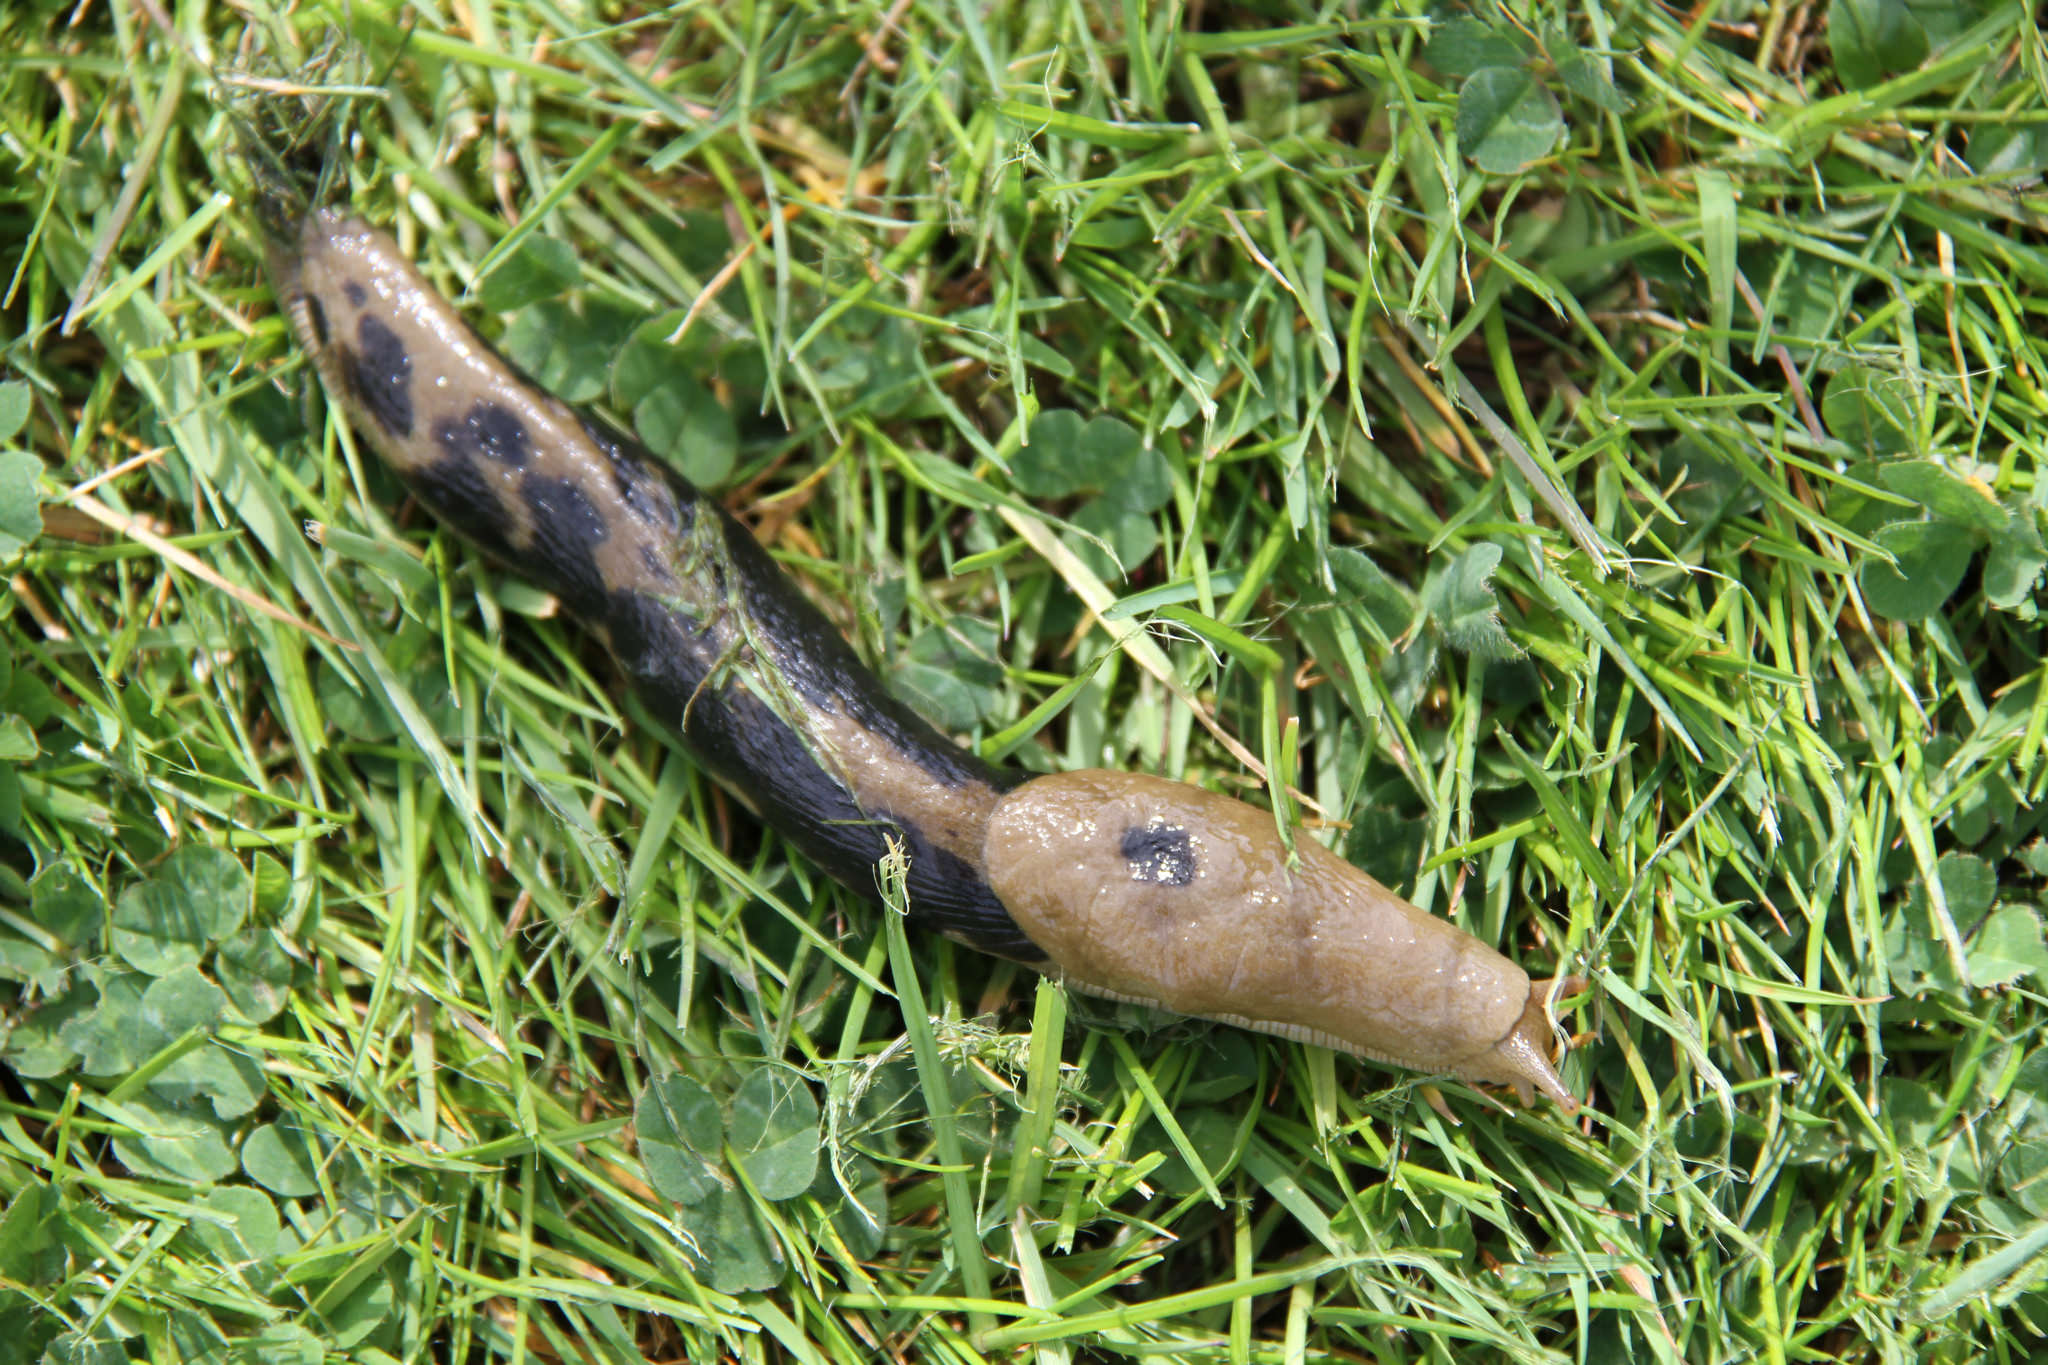 Slug it out with spring’s slimy pests